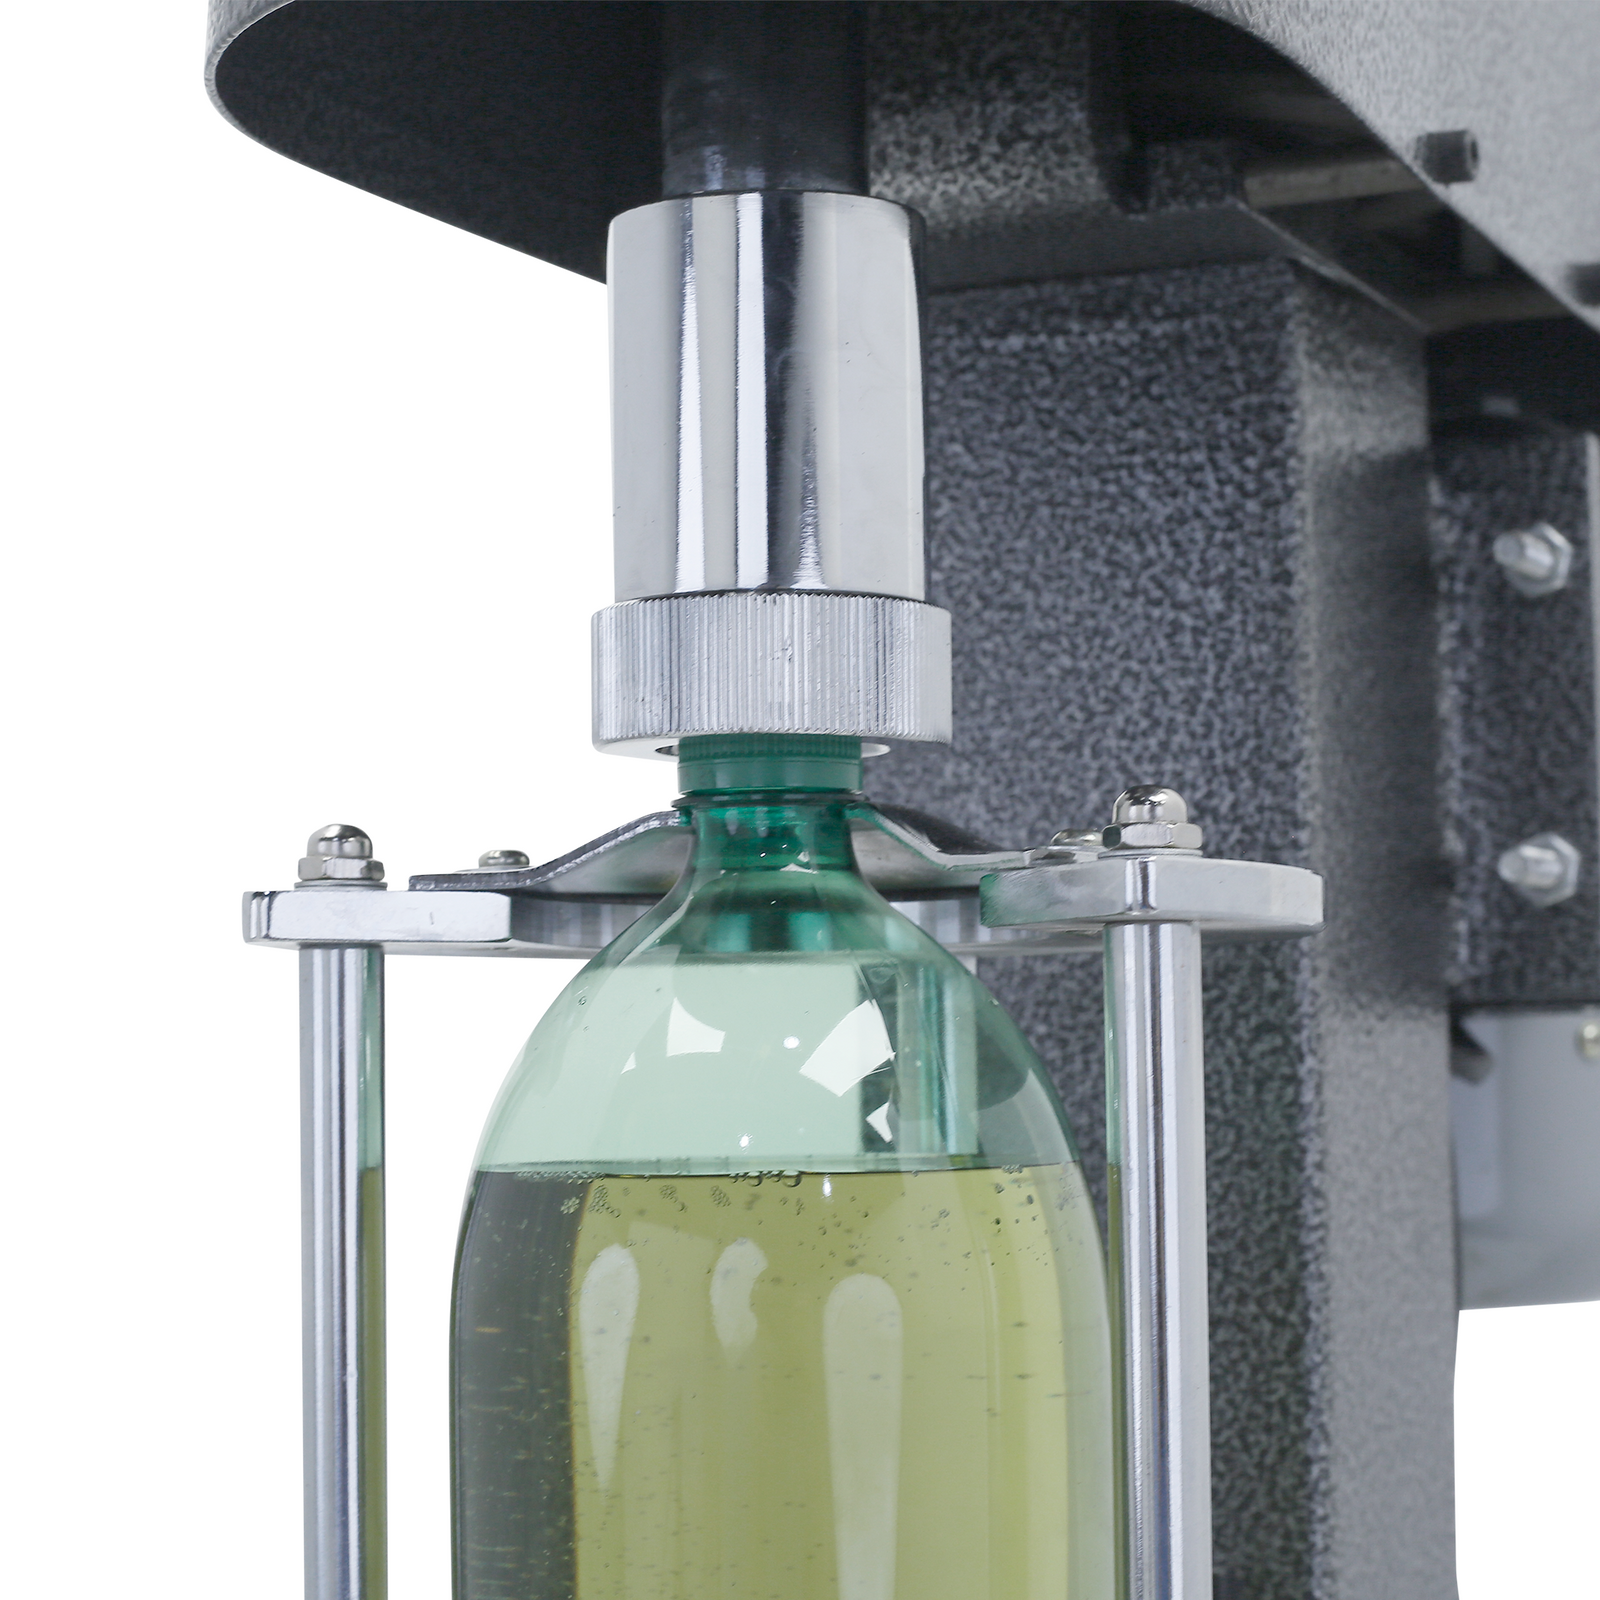 close up of JORES TECHNOLOGIES® semi-automatic gray bottle capper with green plastic bottle filled with green liquid inserted. The capper is screwing the cap in the green bottle.